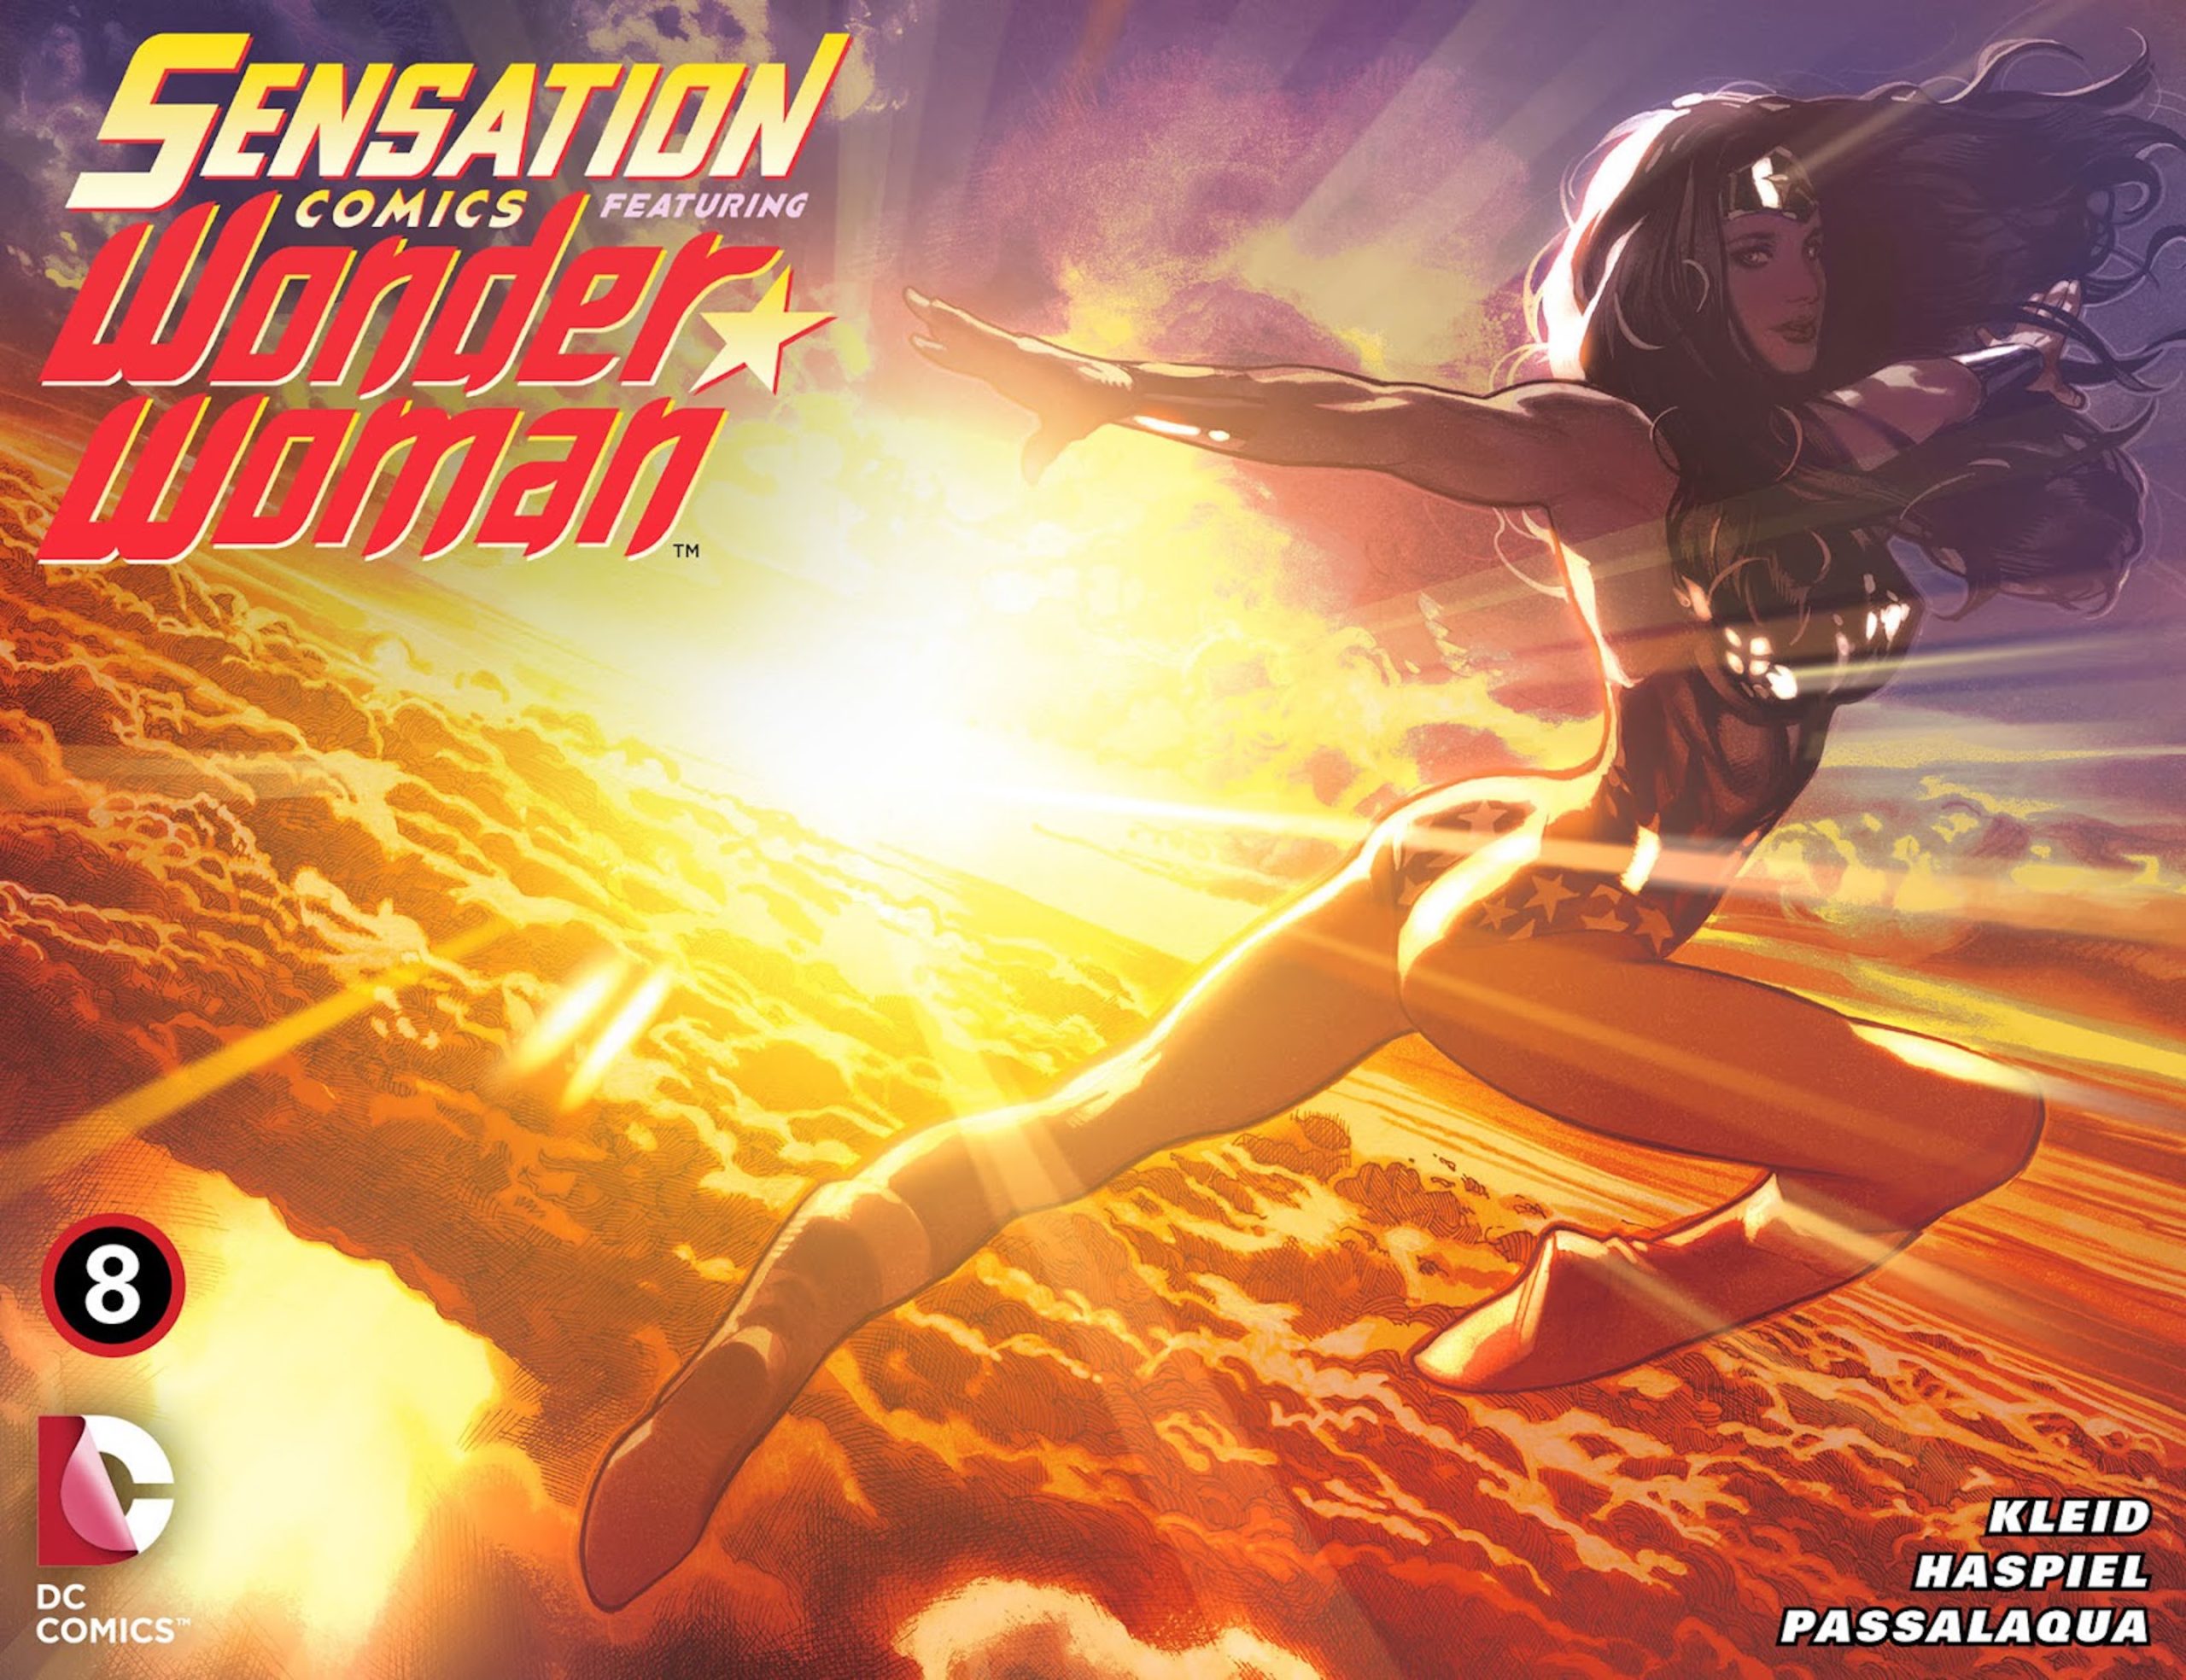 This image is the cover of Sensation Comics Featuring Wonder Woman #8 (2014-2015), where the superhero can be seen flying in an unrealistic stance, in a skin tight bodysuit. 